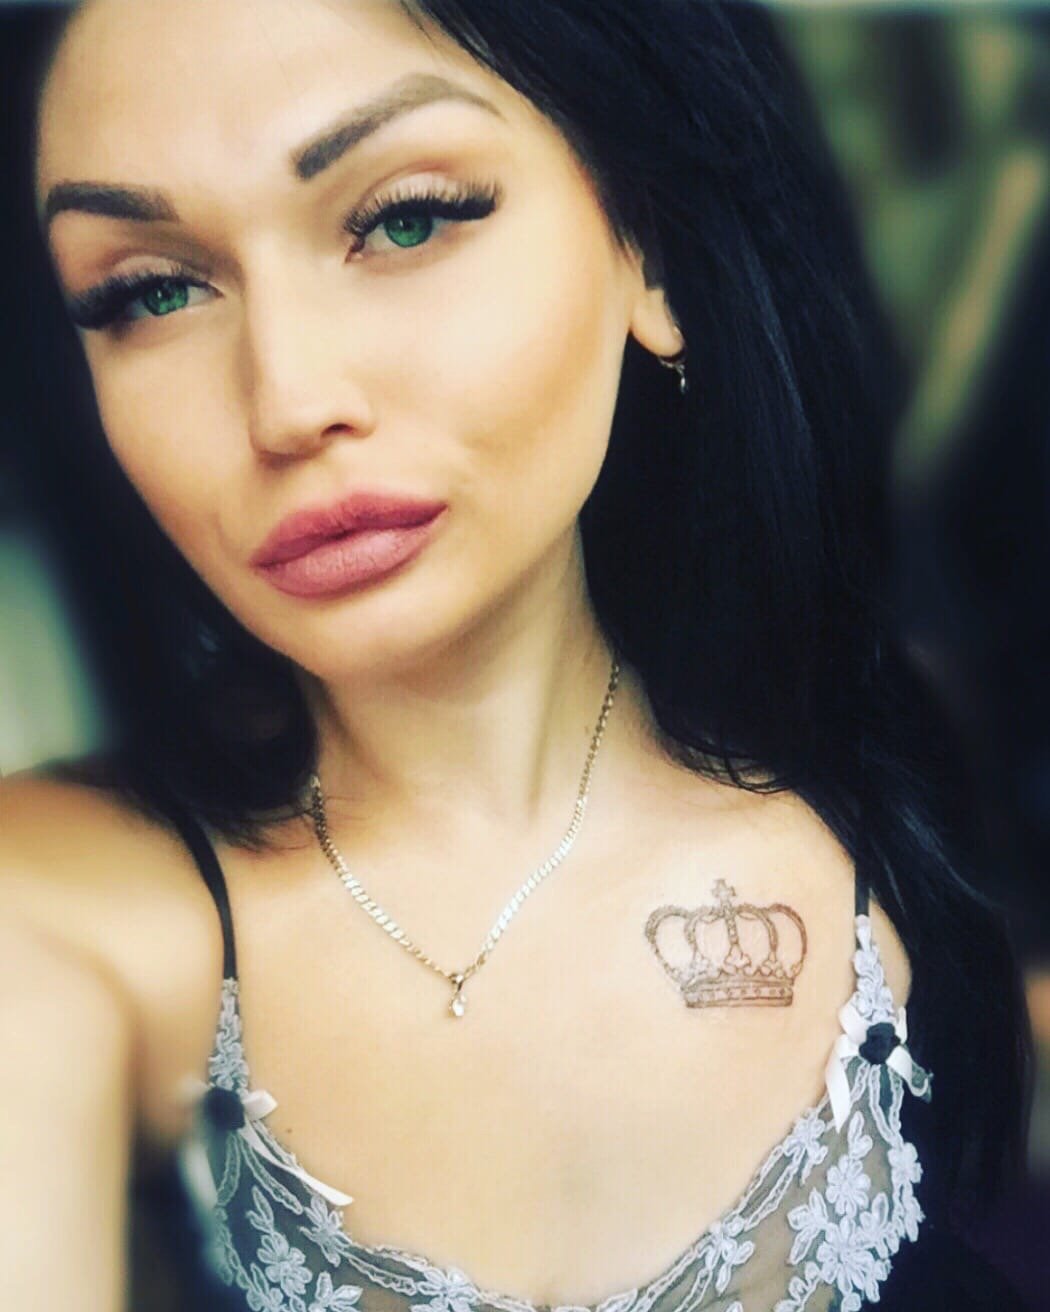 🎵🎶 Musician looking for a partner to make beautiful music with. 💘😍 Love is waiting in my bio link! ❤️👩‍❤️‍👨💕